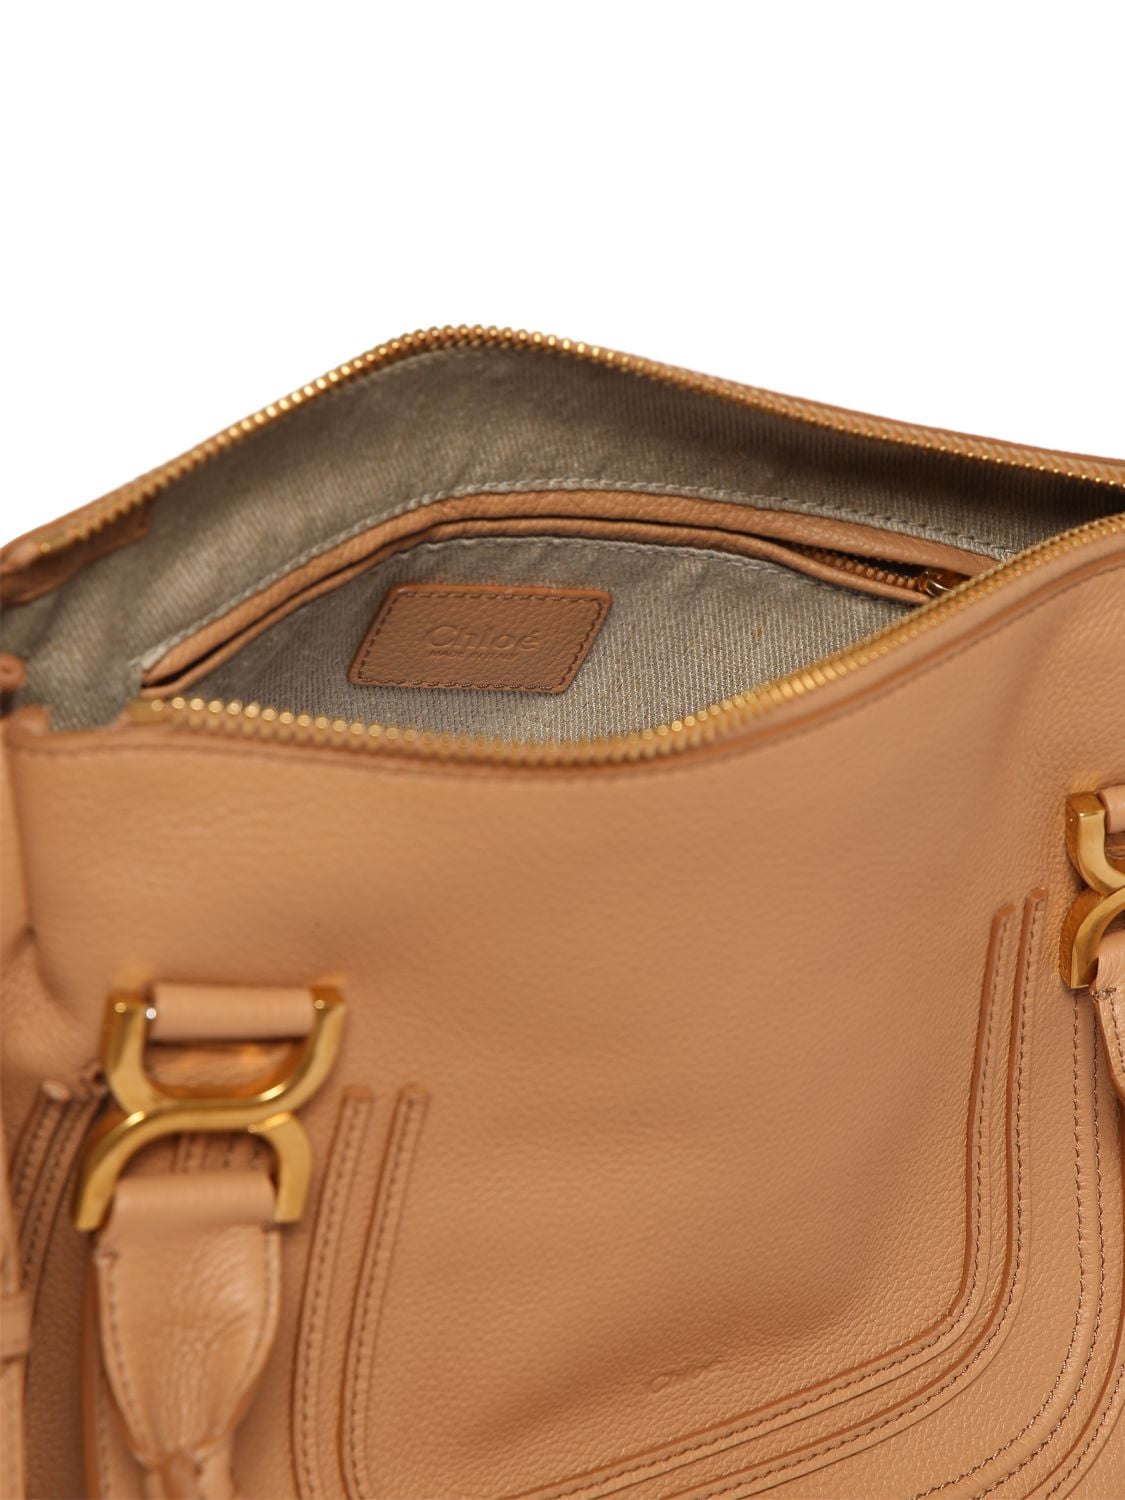 Shop Chloé Small Marcie Leather Shoulder Bag In Light Tan